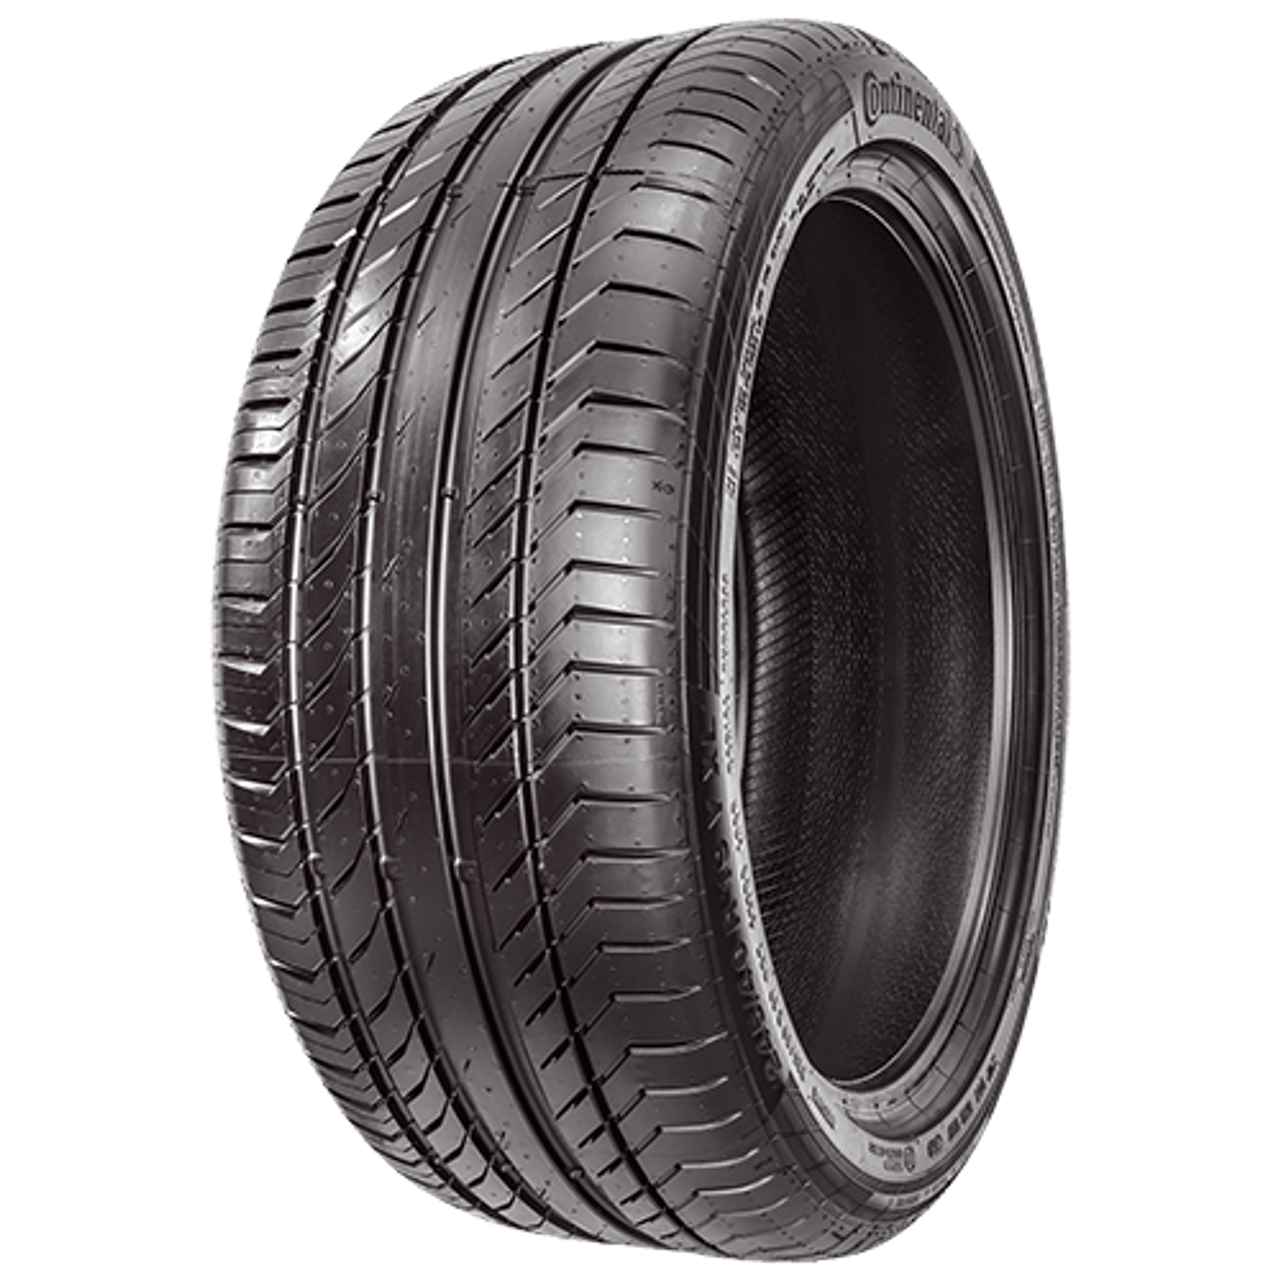 CONTINENTAL CONTISPORTCONTACT 5 SUV (VW) 255/45R19 100V FR